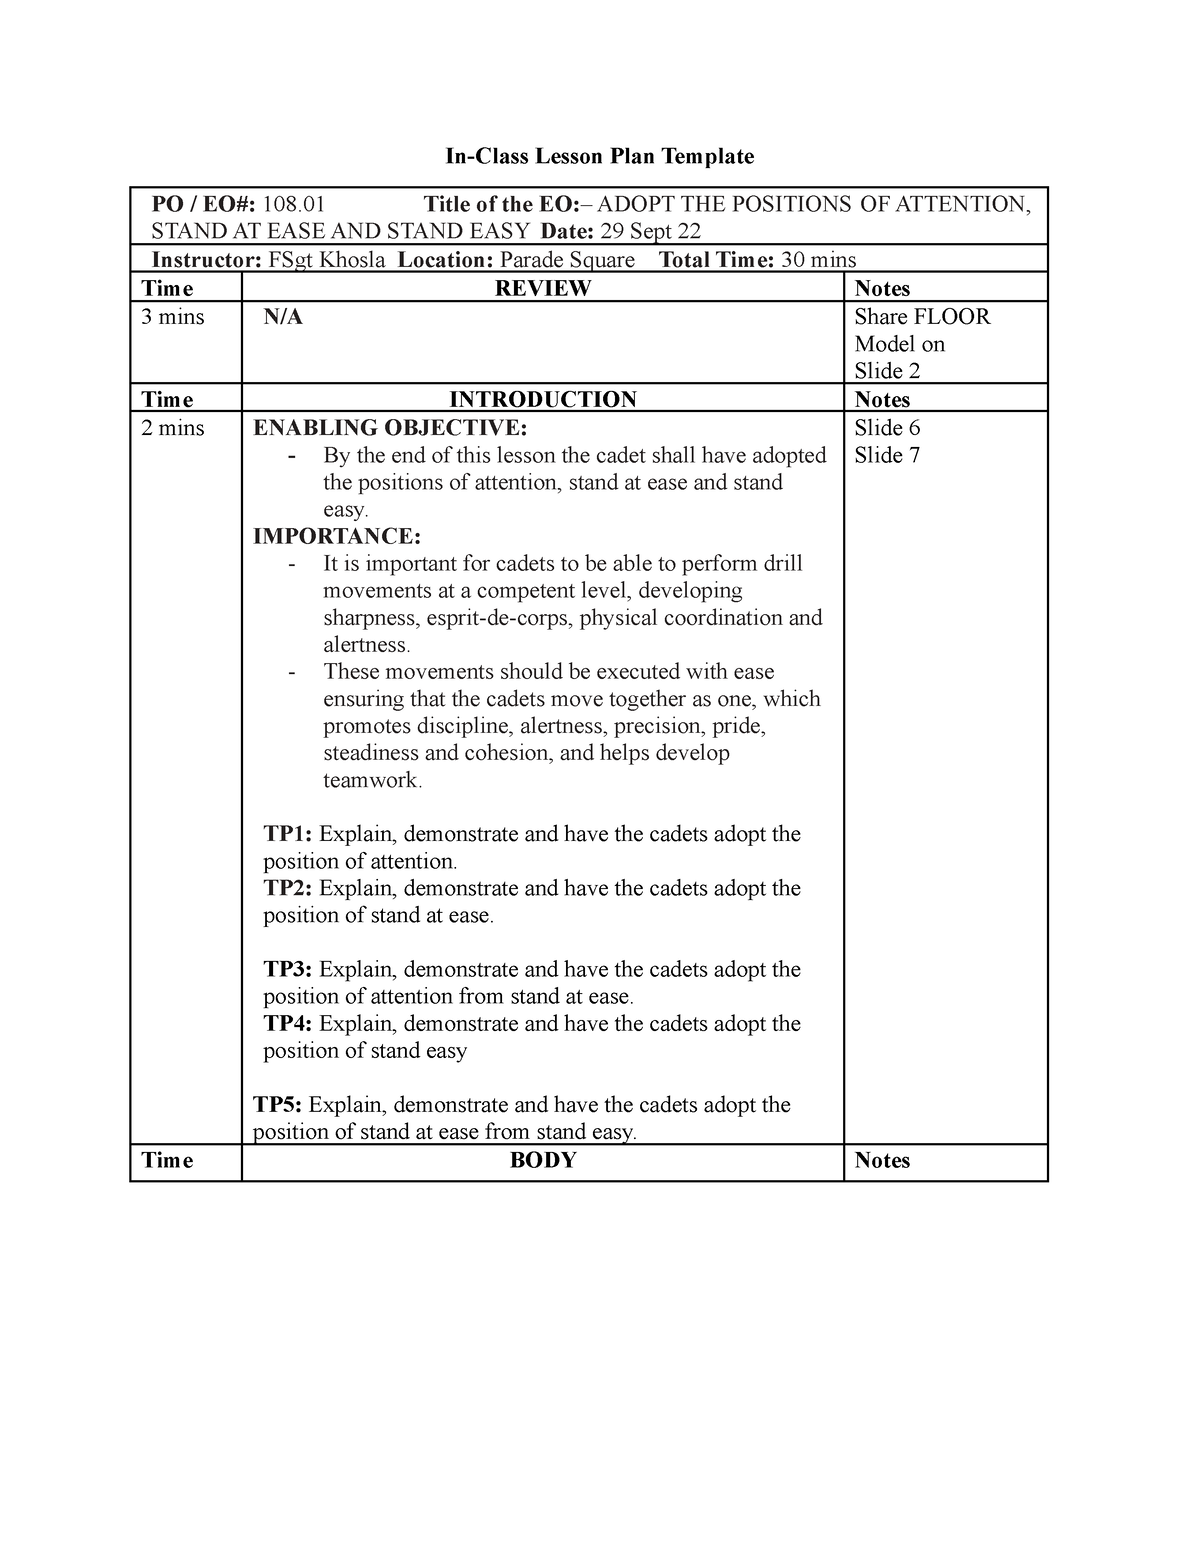 M108 - Air Cadets - In-Class Lesson Plan Template PO / EO#: 108 Title ...